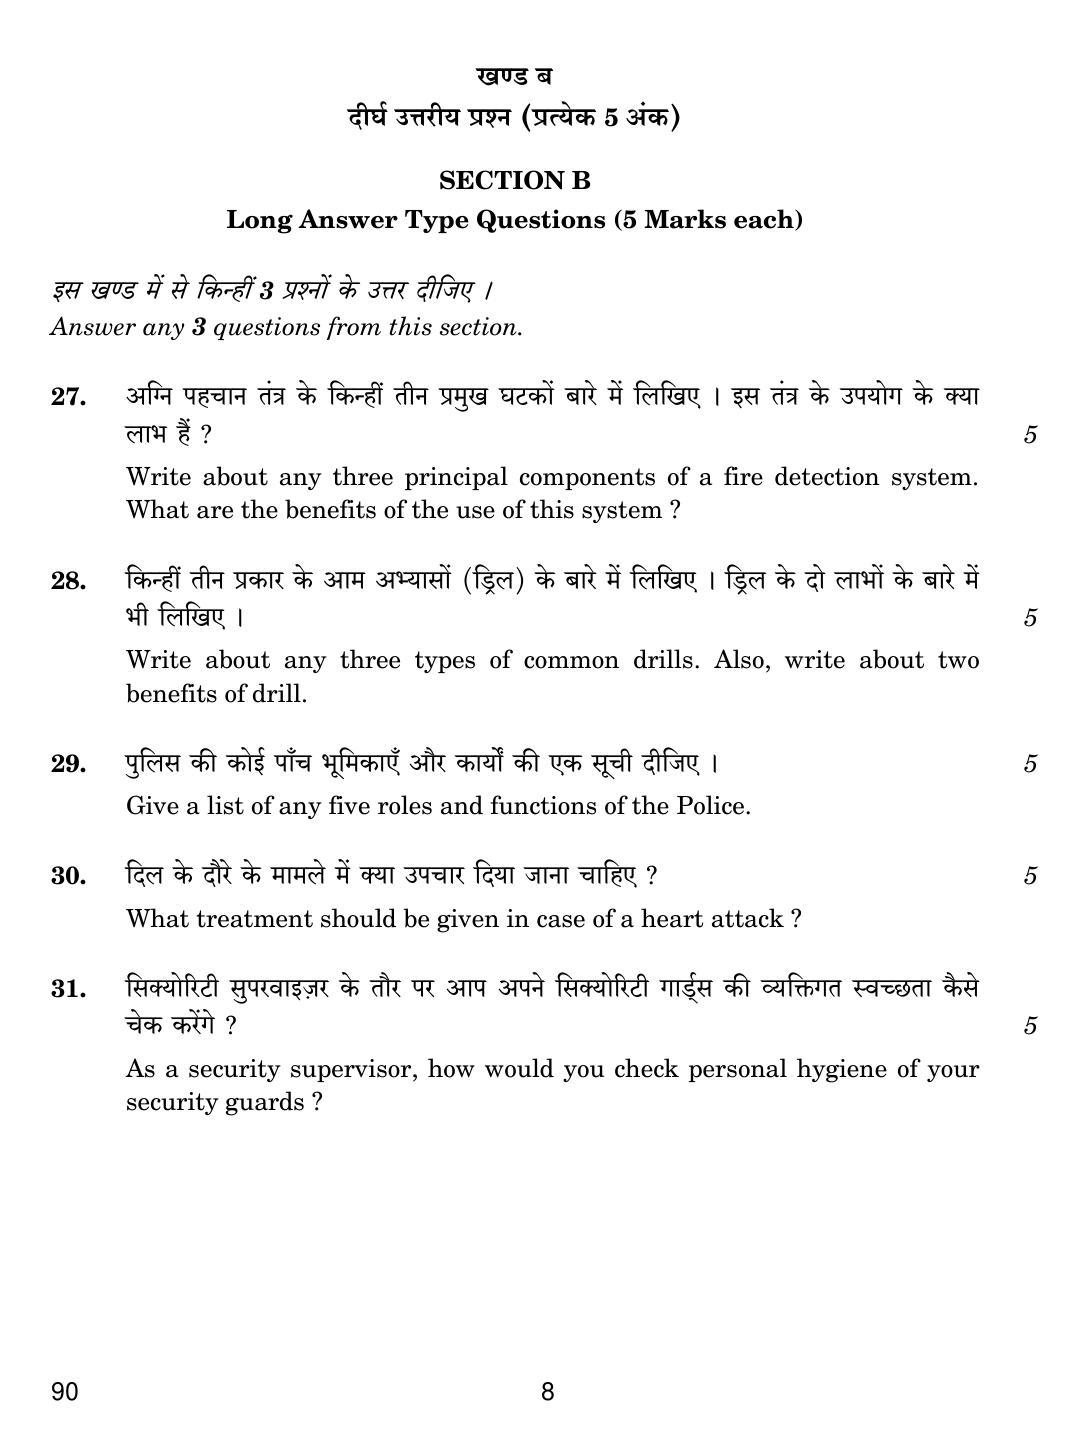 CBSE Class 10 90 SECURITY 2019 Question Paper - Page 8